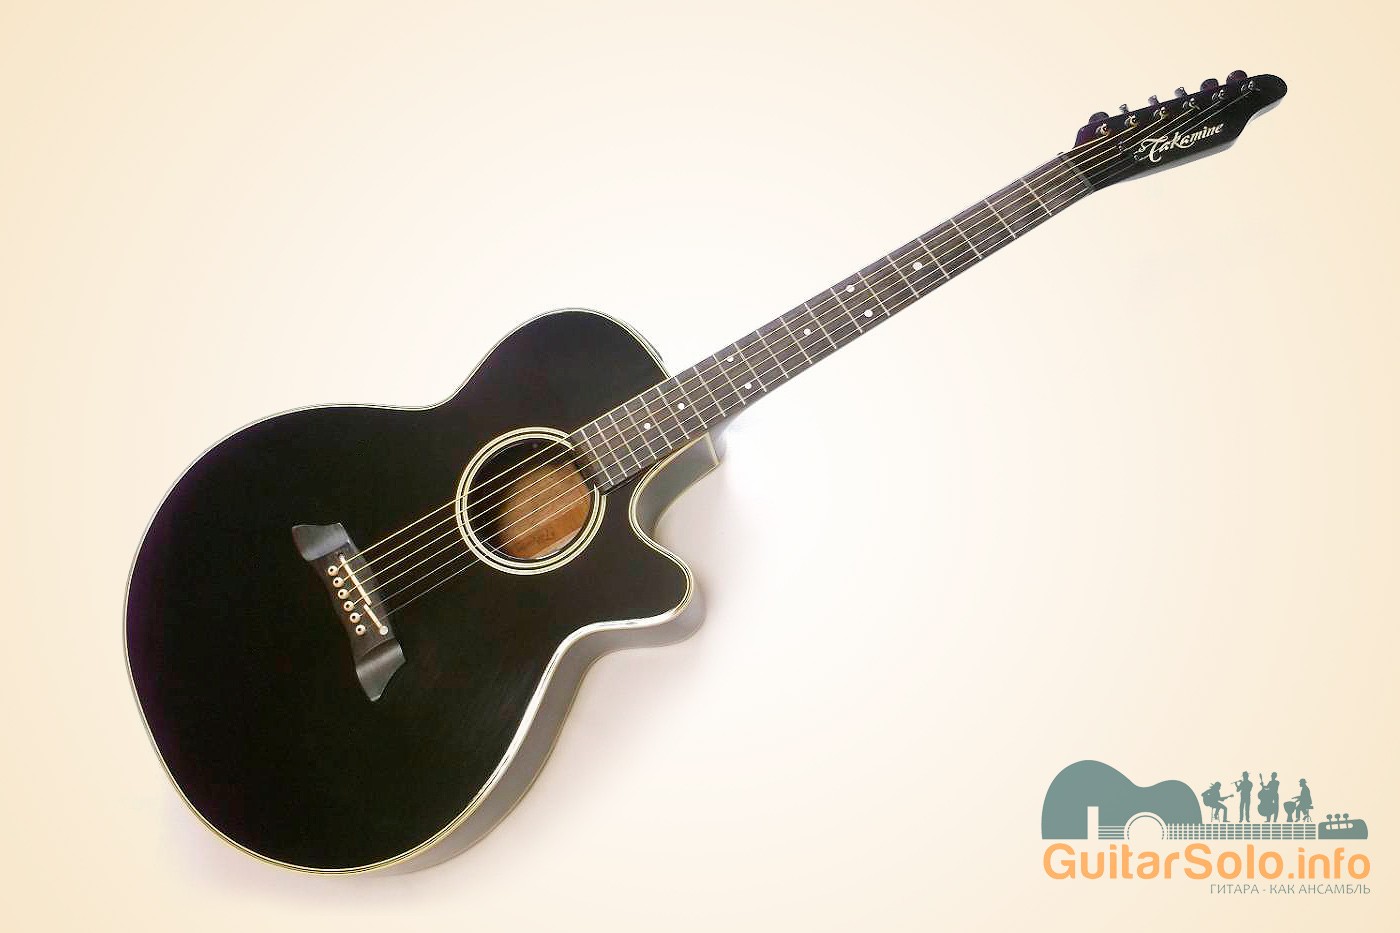 Review of the Takamine PT-106 (PT-106-6) guitar. Features and Specs